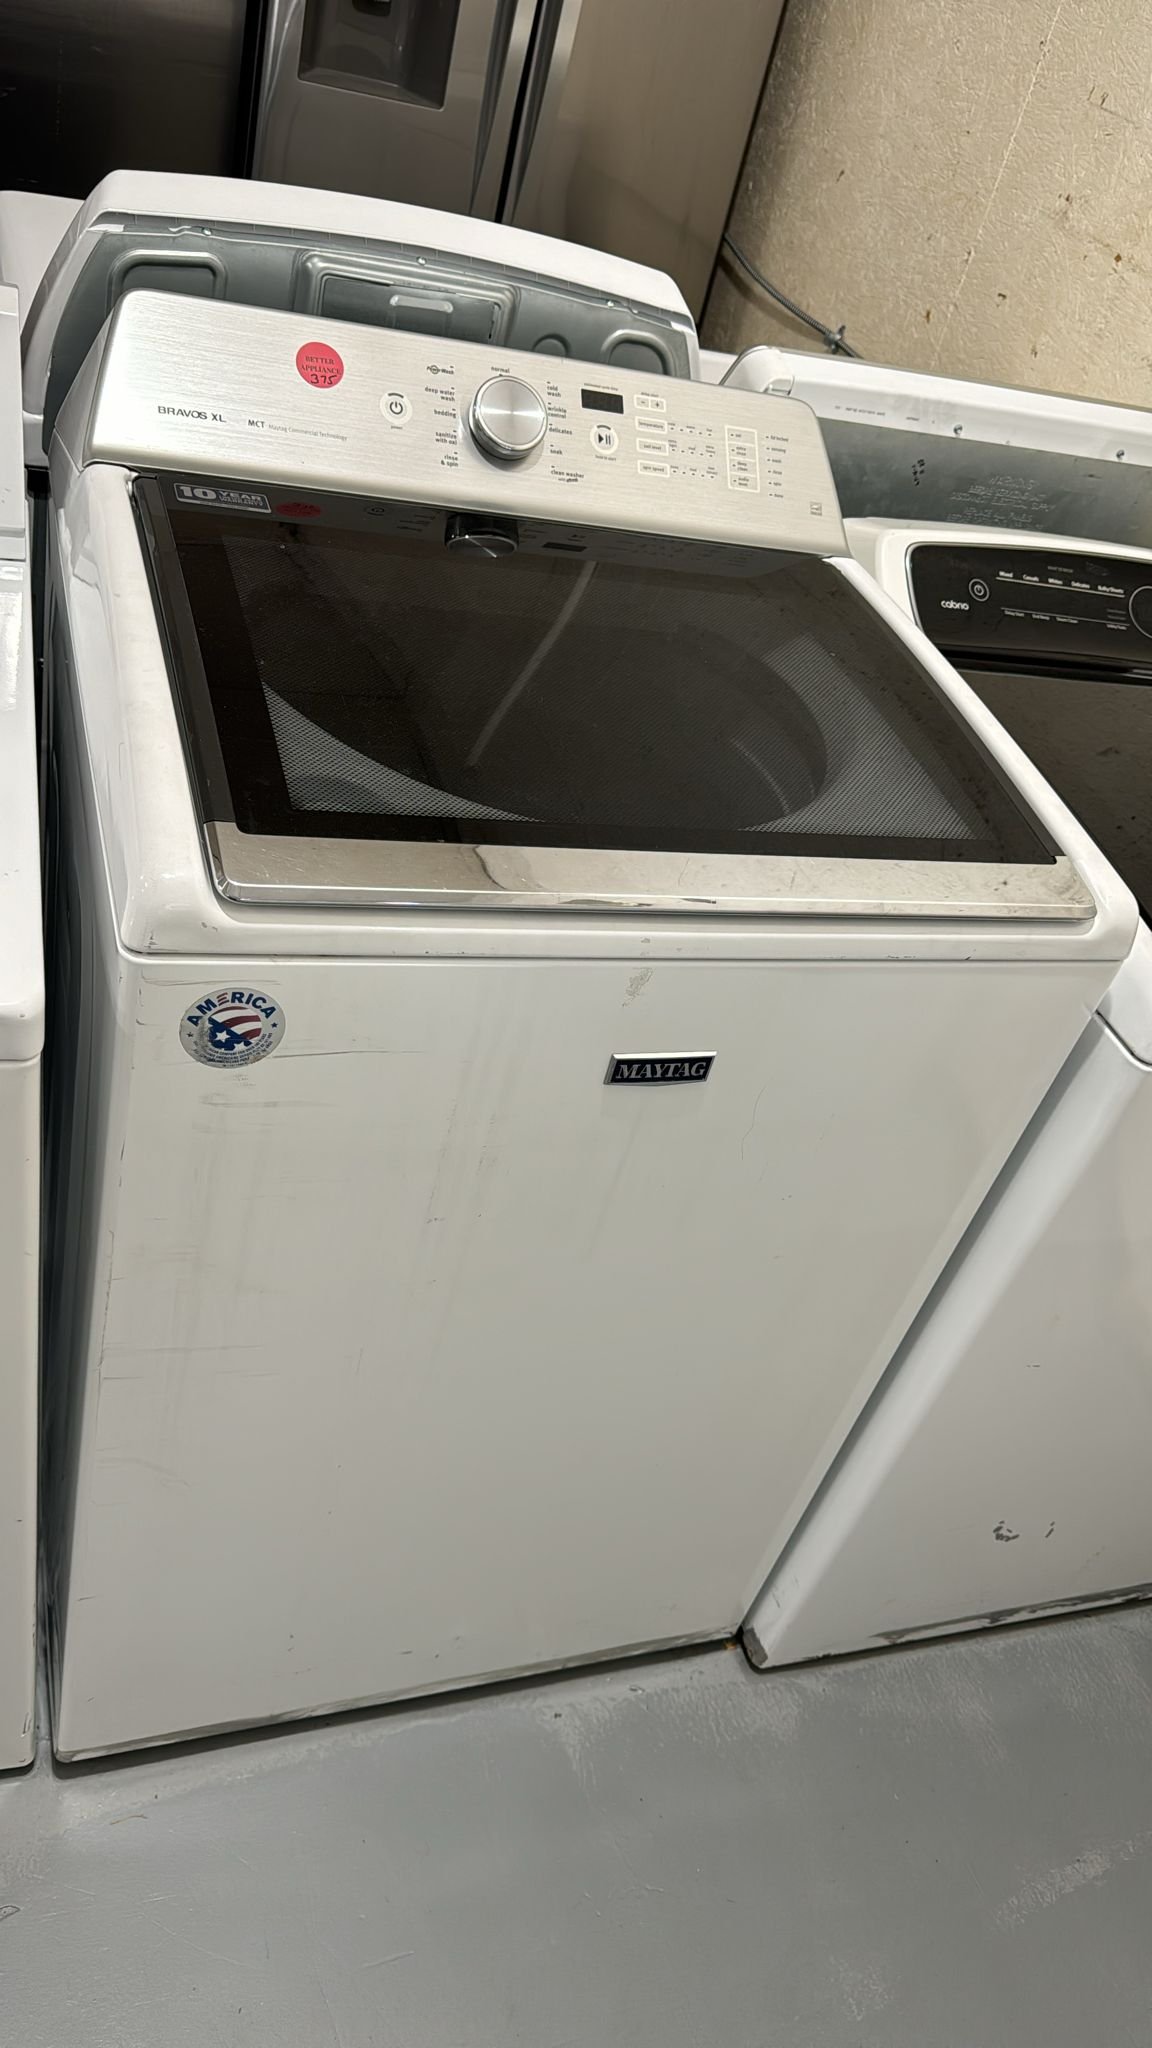 Maytag Like New Top Load Washer